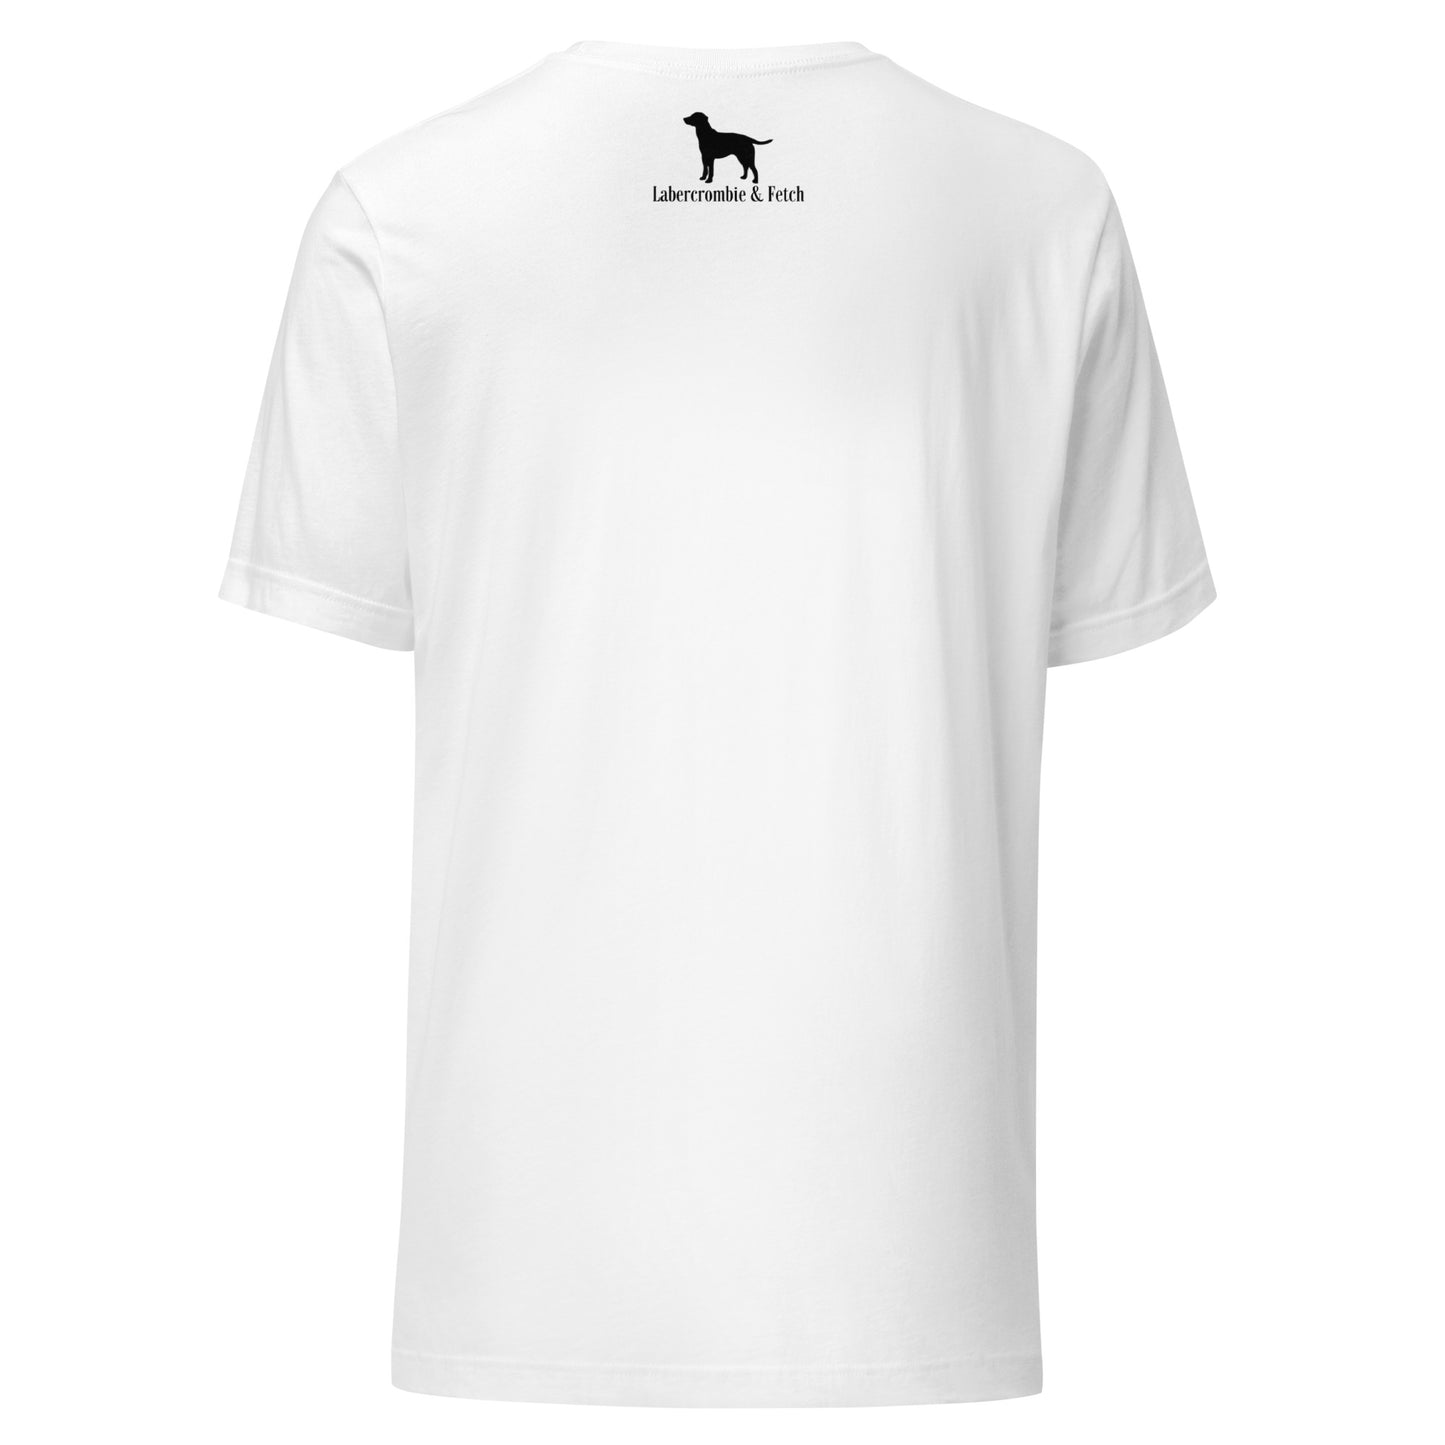 Waggy Unisex t-shirt